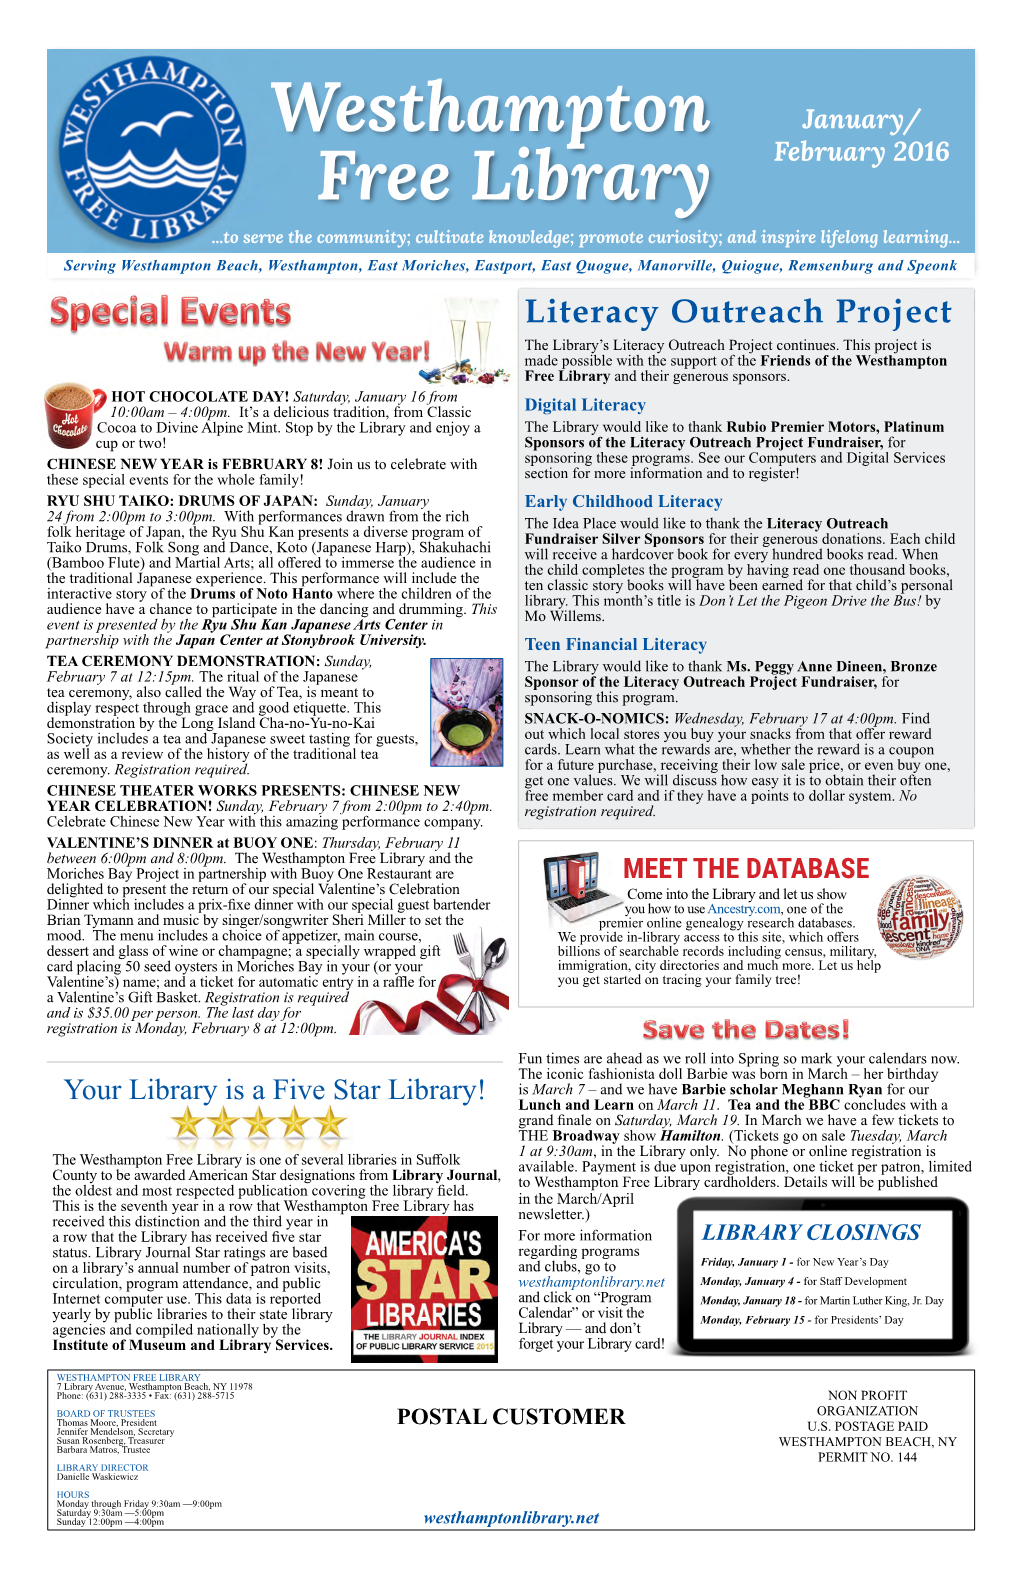 Westhampton Free Library and Their Generous Sponsors